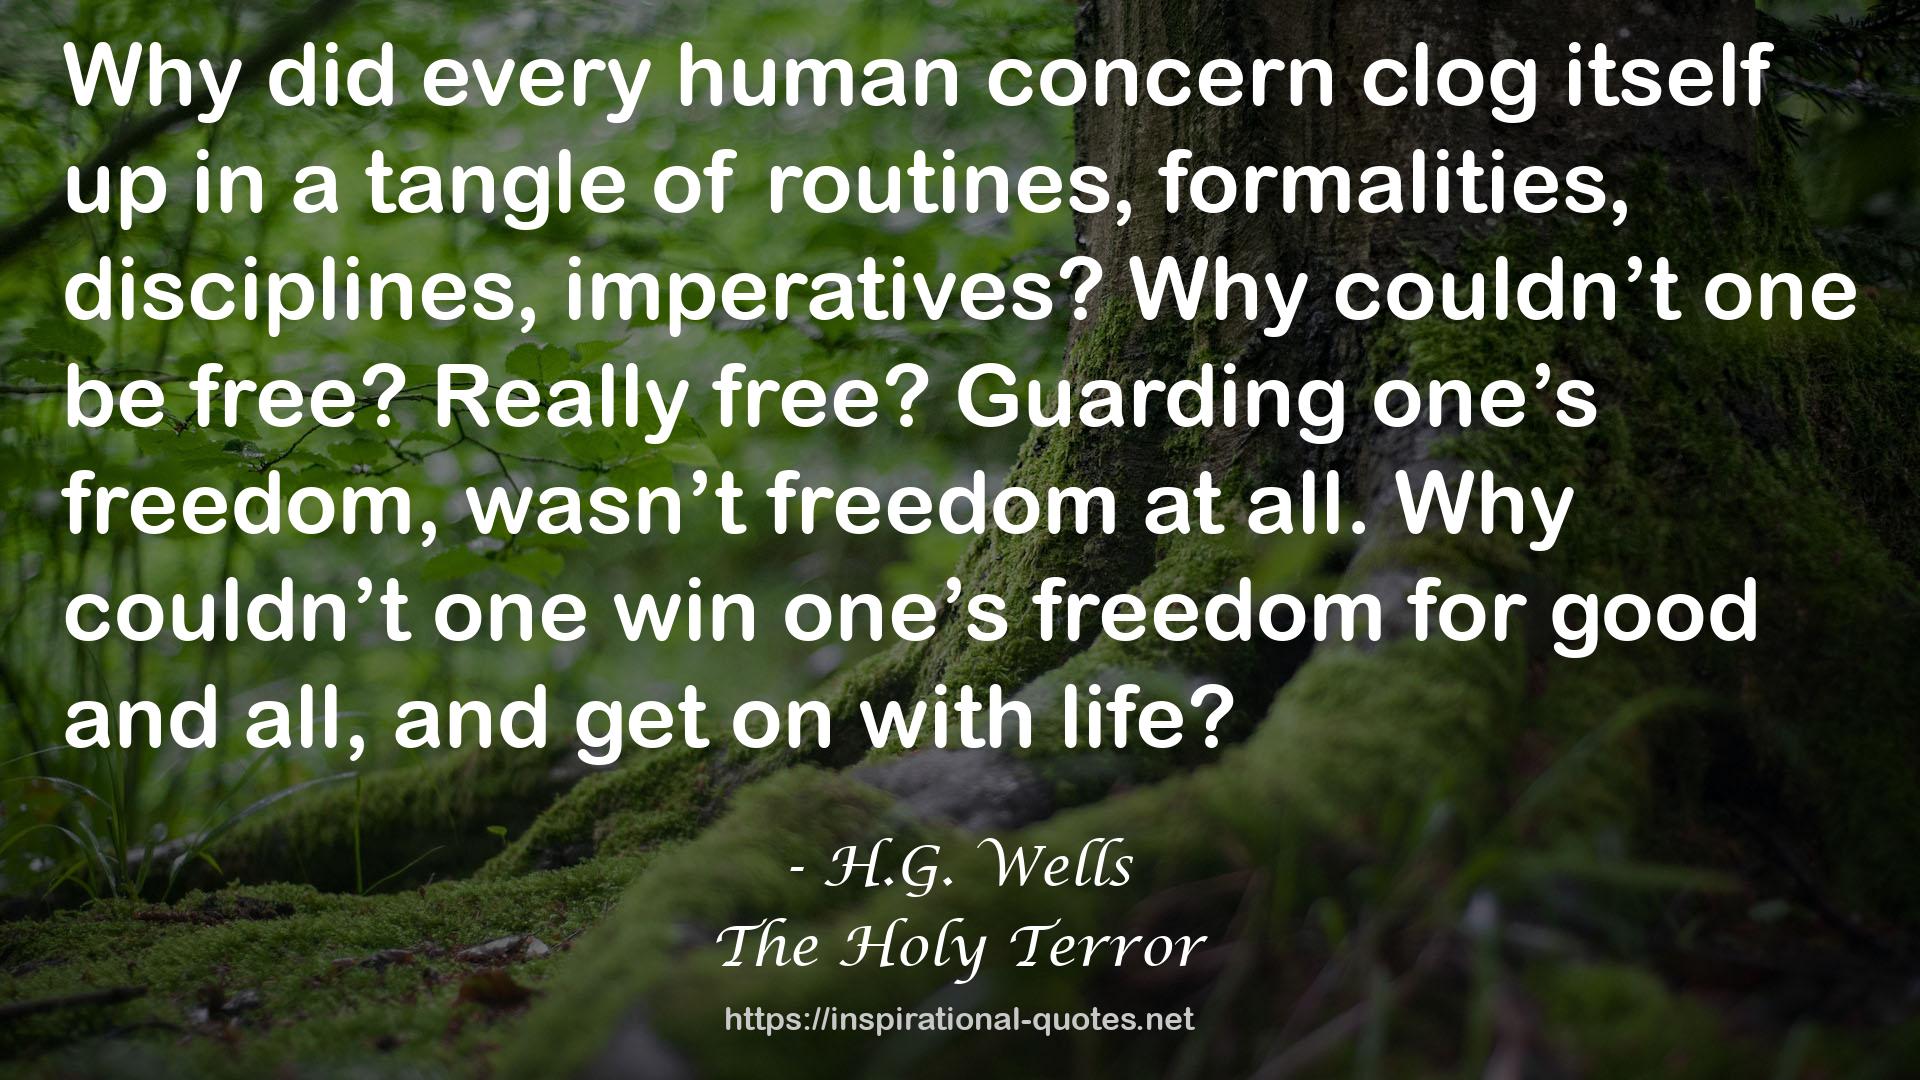 H.G. Wells QUOTES